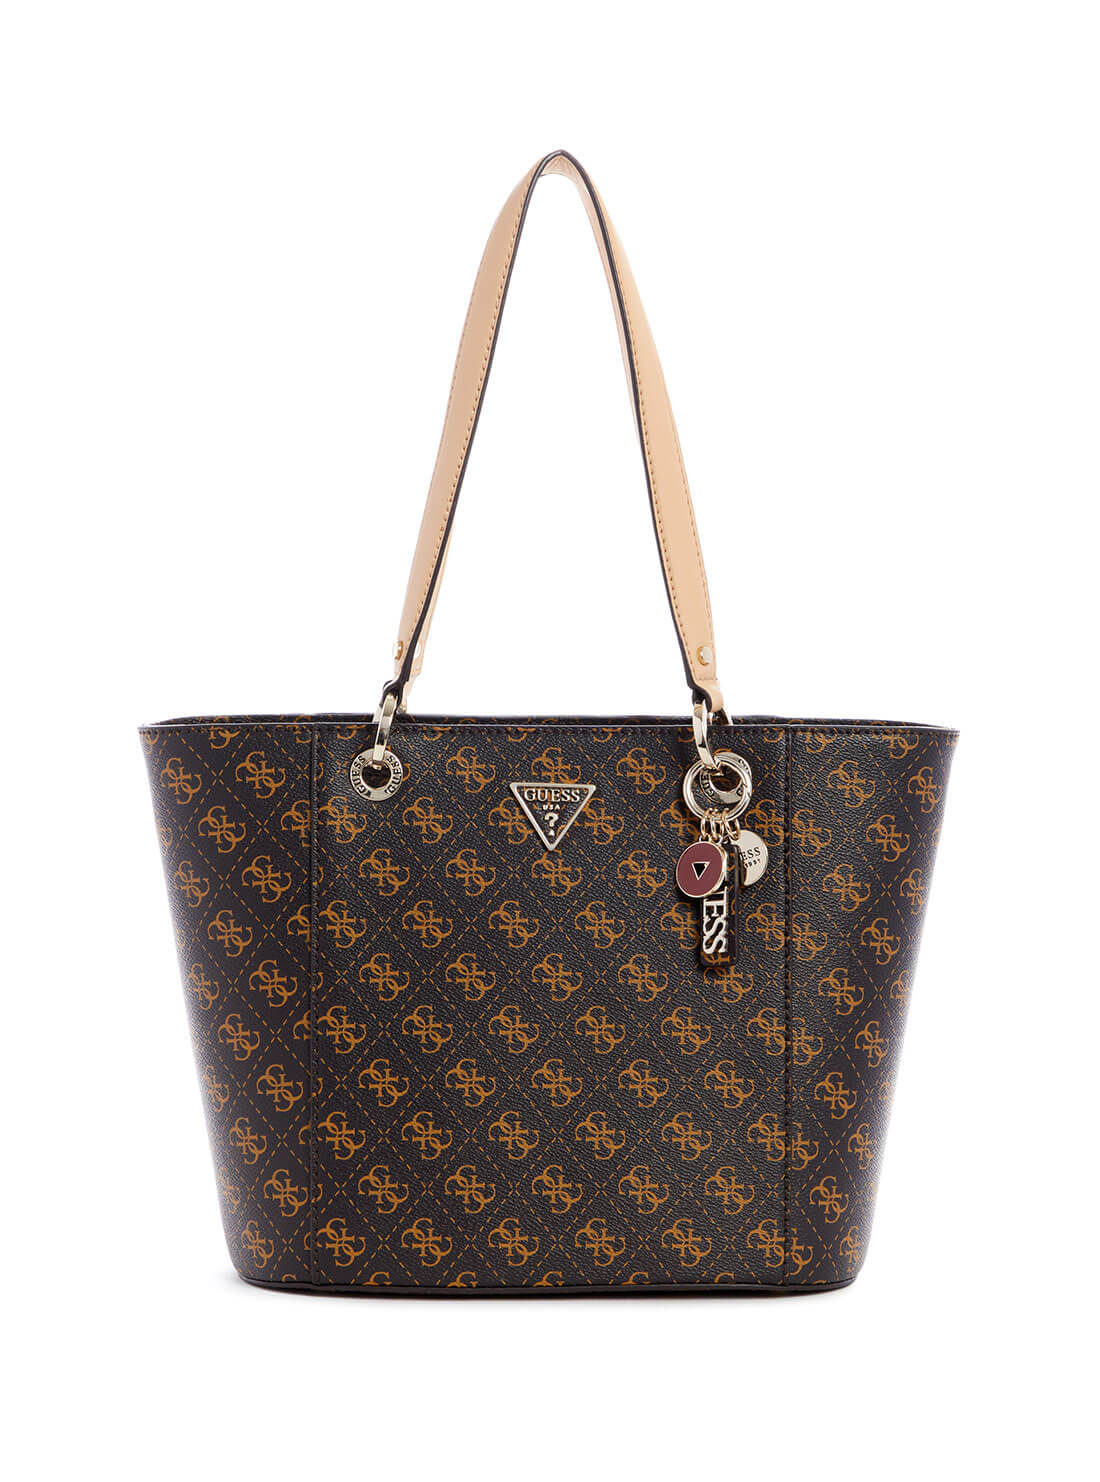 Brown Noelle Logo Small Elite Tote Bag  | GUESS Women's Handbags | front view